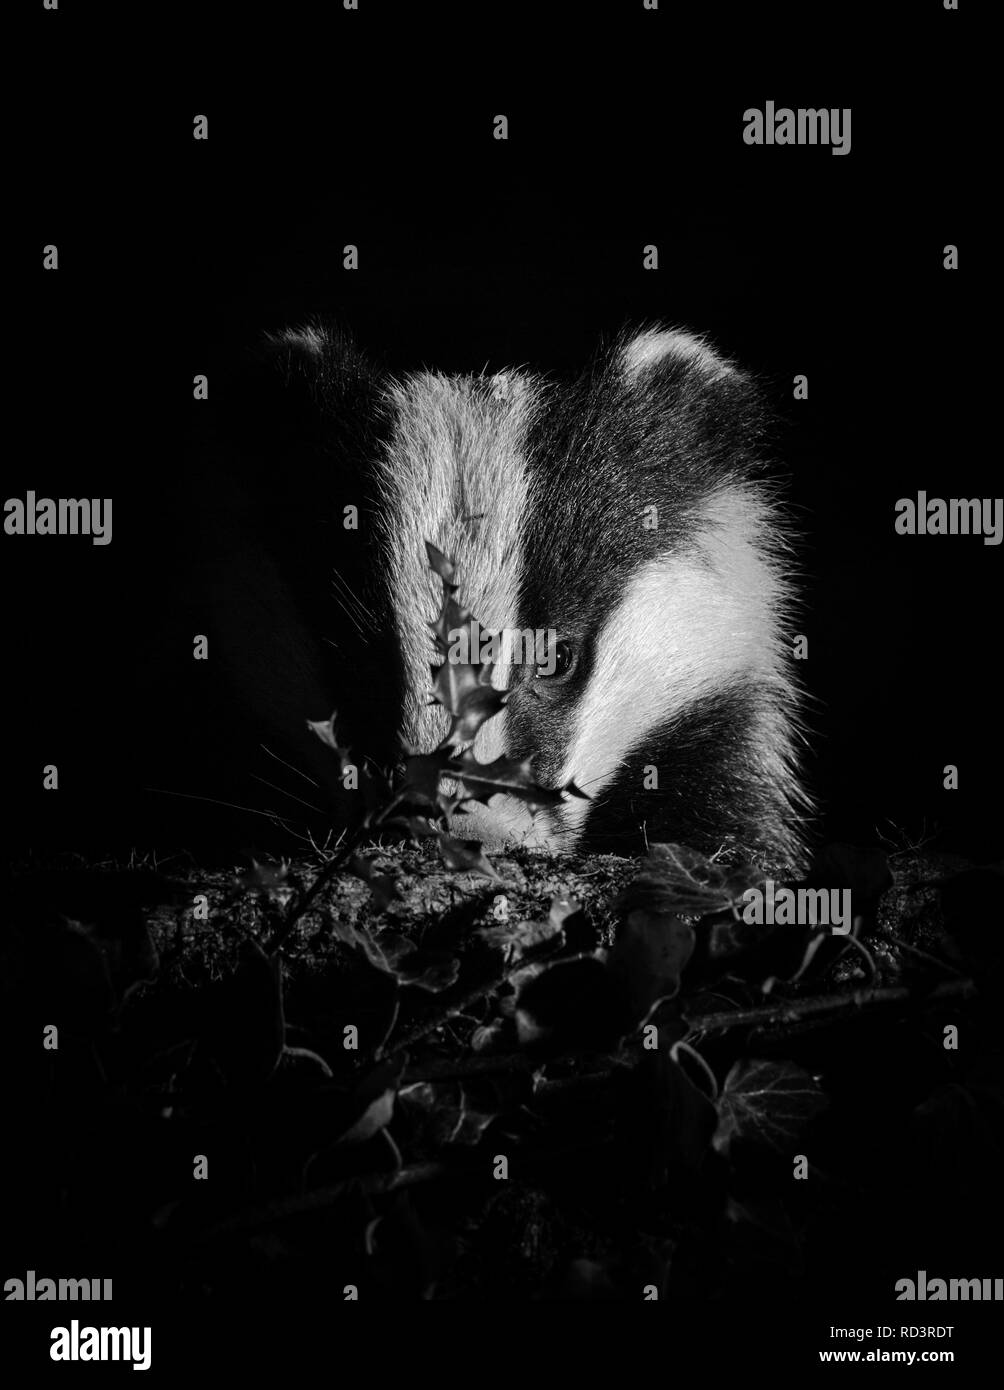 An Iconic Wild Badger in Sheffield, U.K. Badgers have been heavily persecuted in recent times but are amazing to see, very shy and elusive. Stock Photo